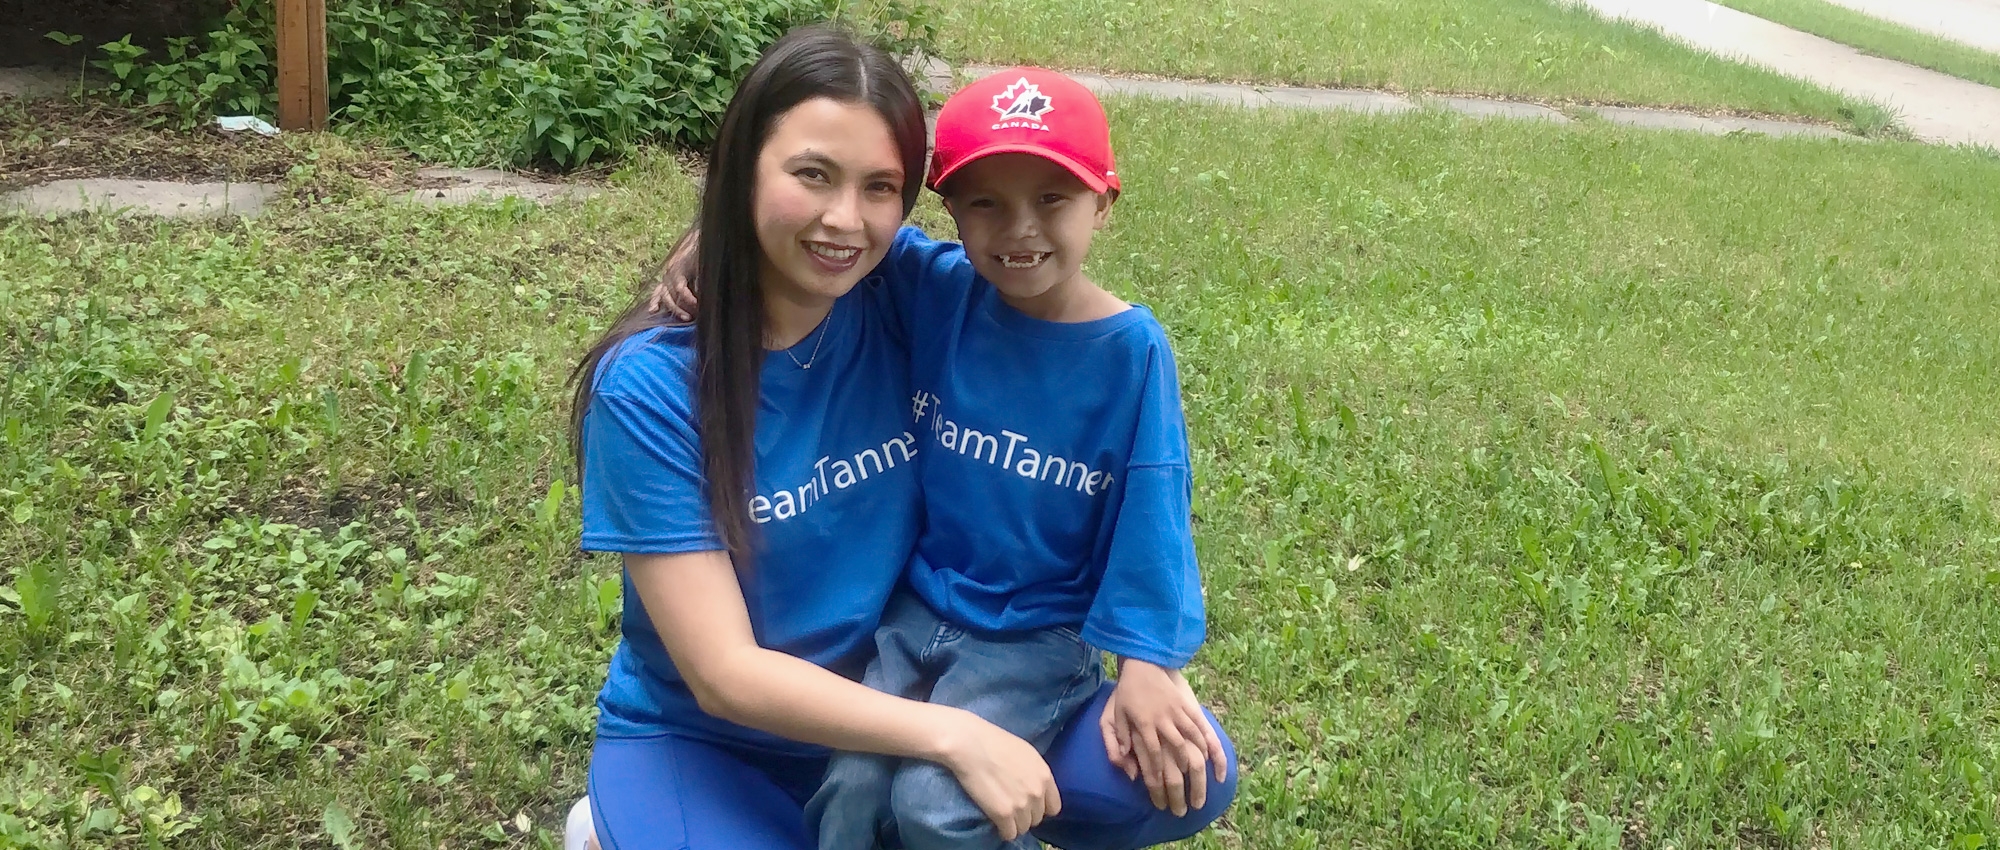 Miranda McLeod and her son Tanner smile together on their lawn.